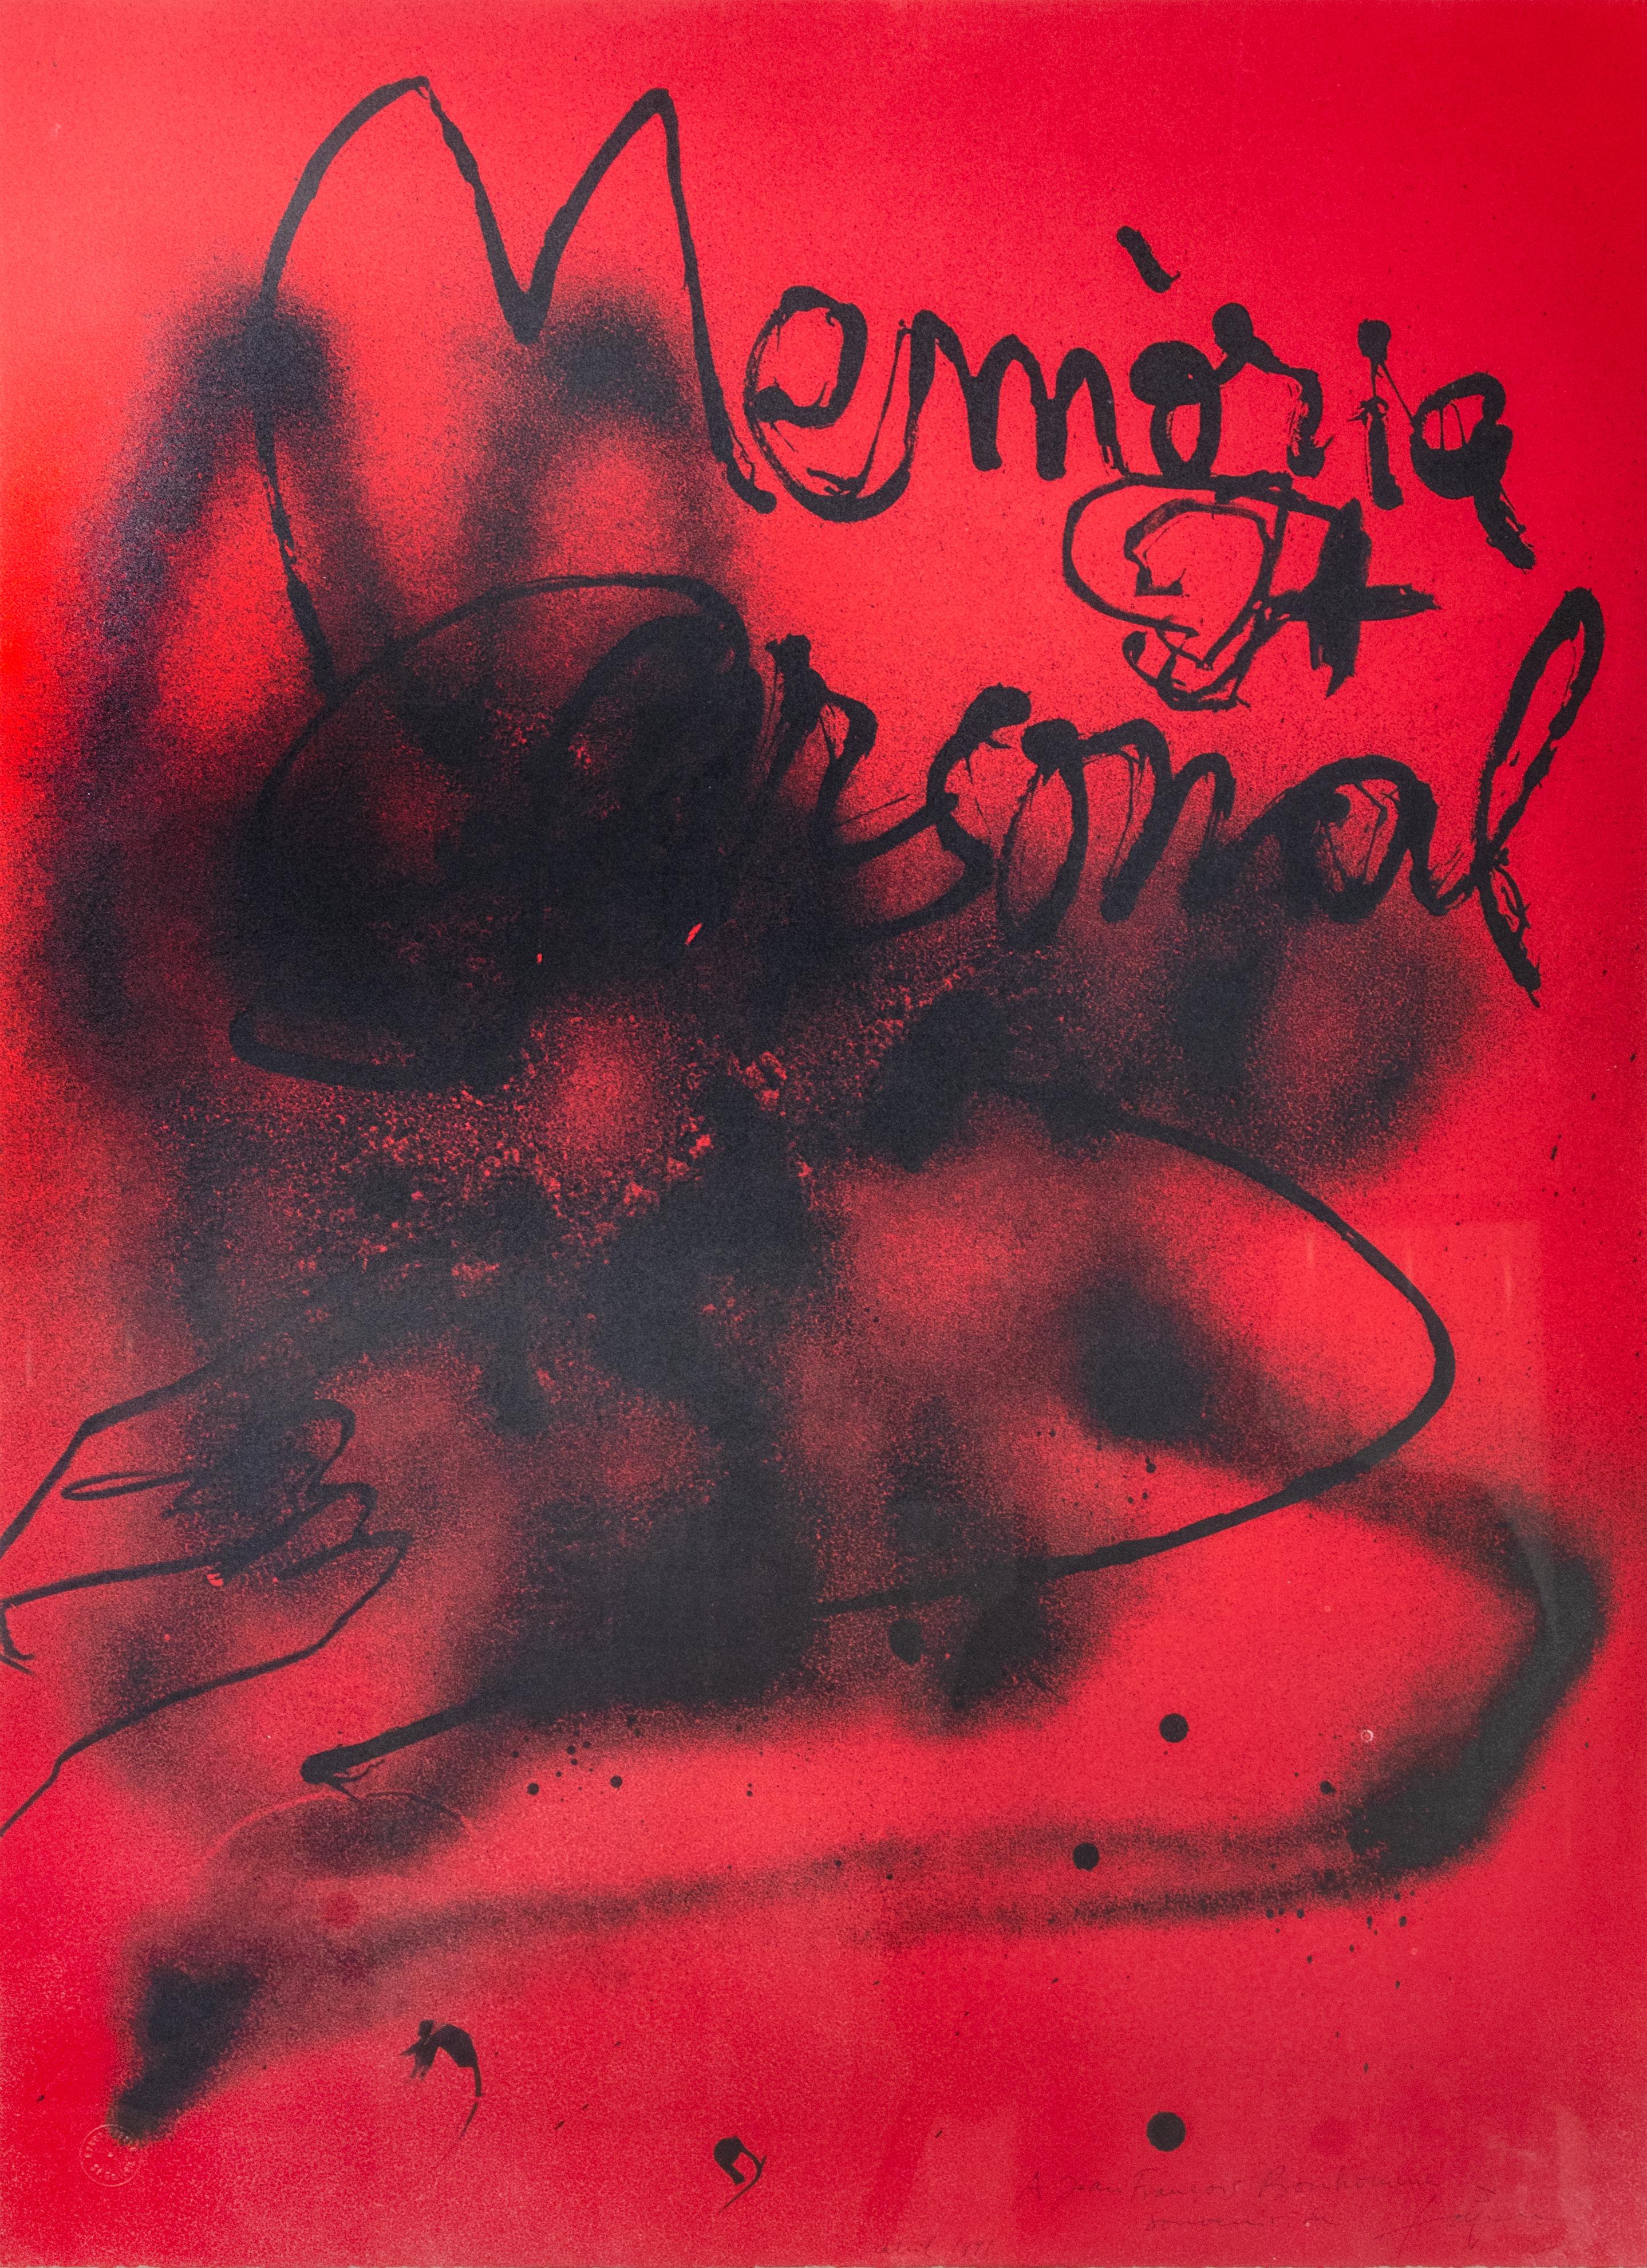 Antoni Tàpies Abstract Print - Memoria Personal - Lithograph by Antoni Tapies - 1988